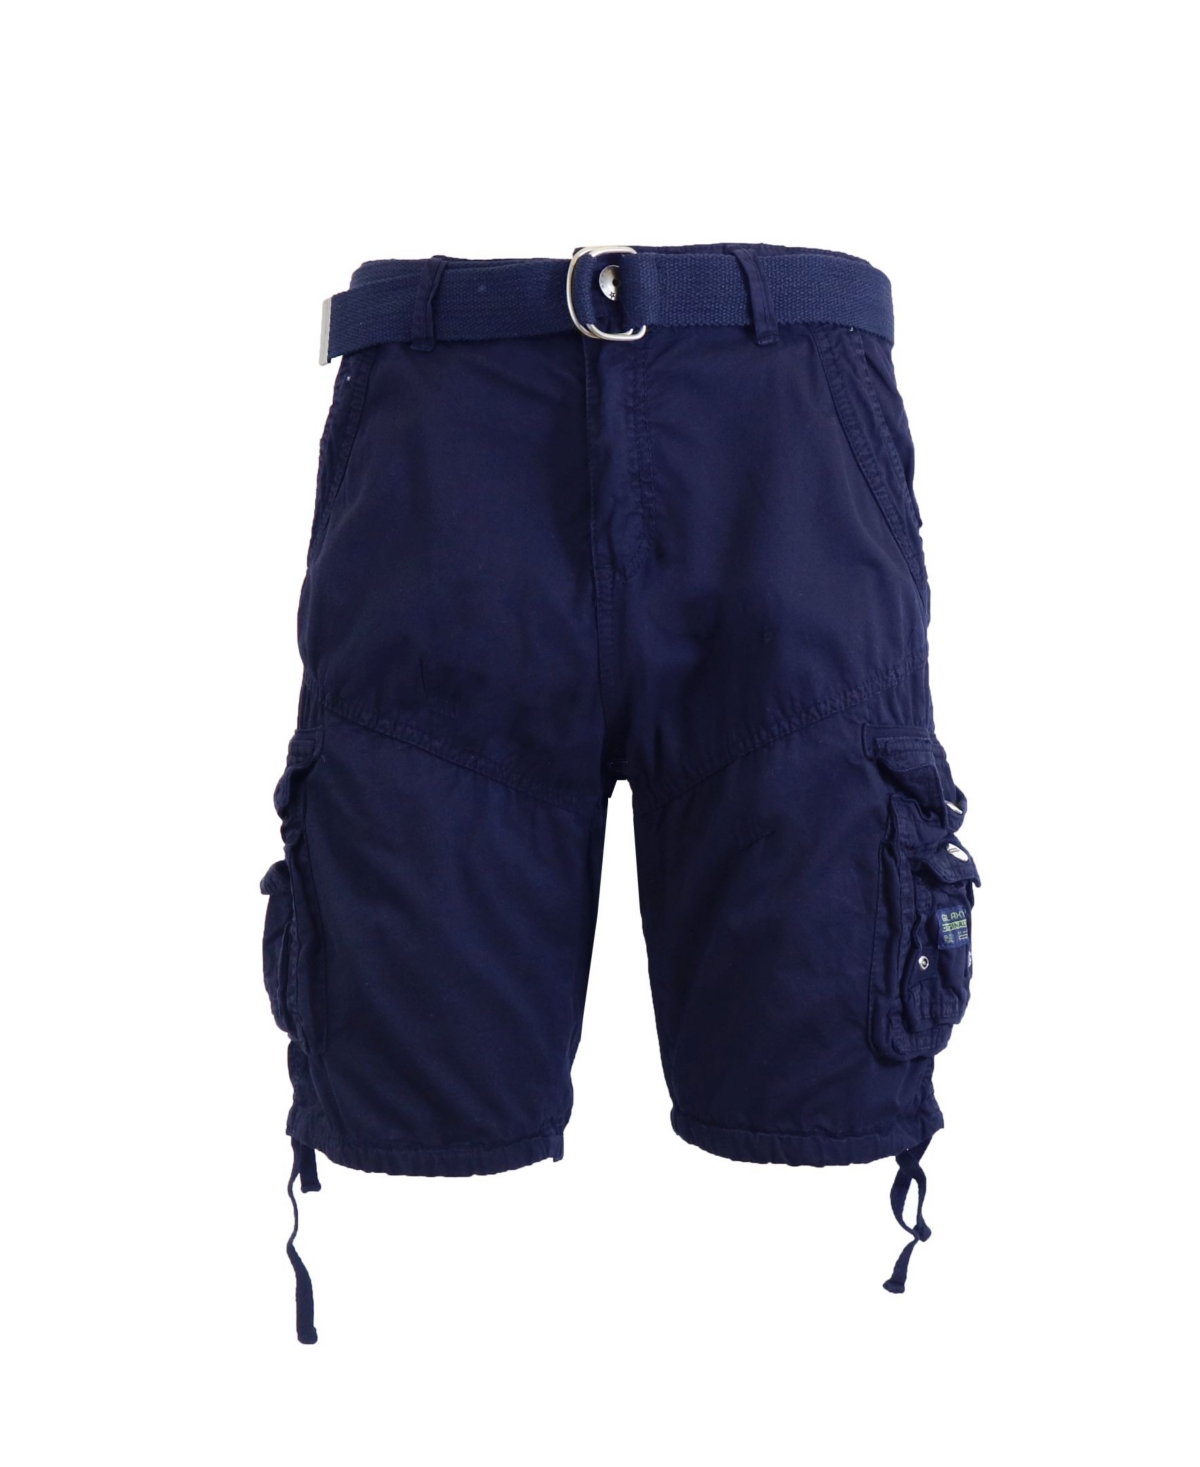 Men's Belted Cargo Shorts with Twill Flat Front Washed Utility Pockets - Navy